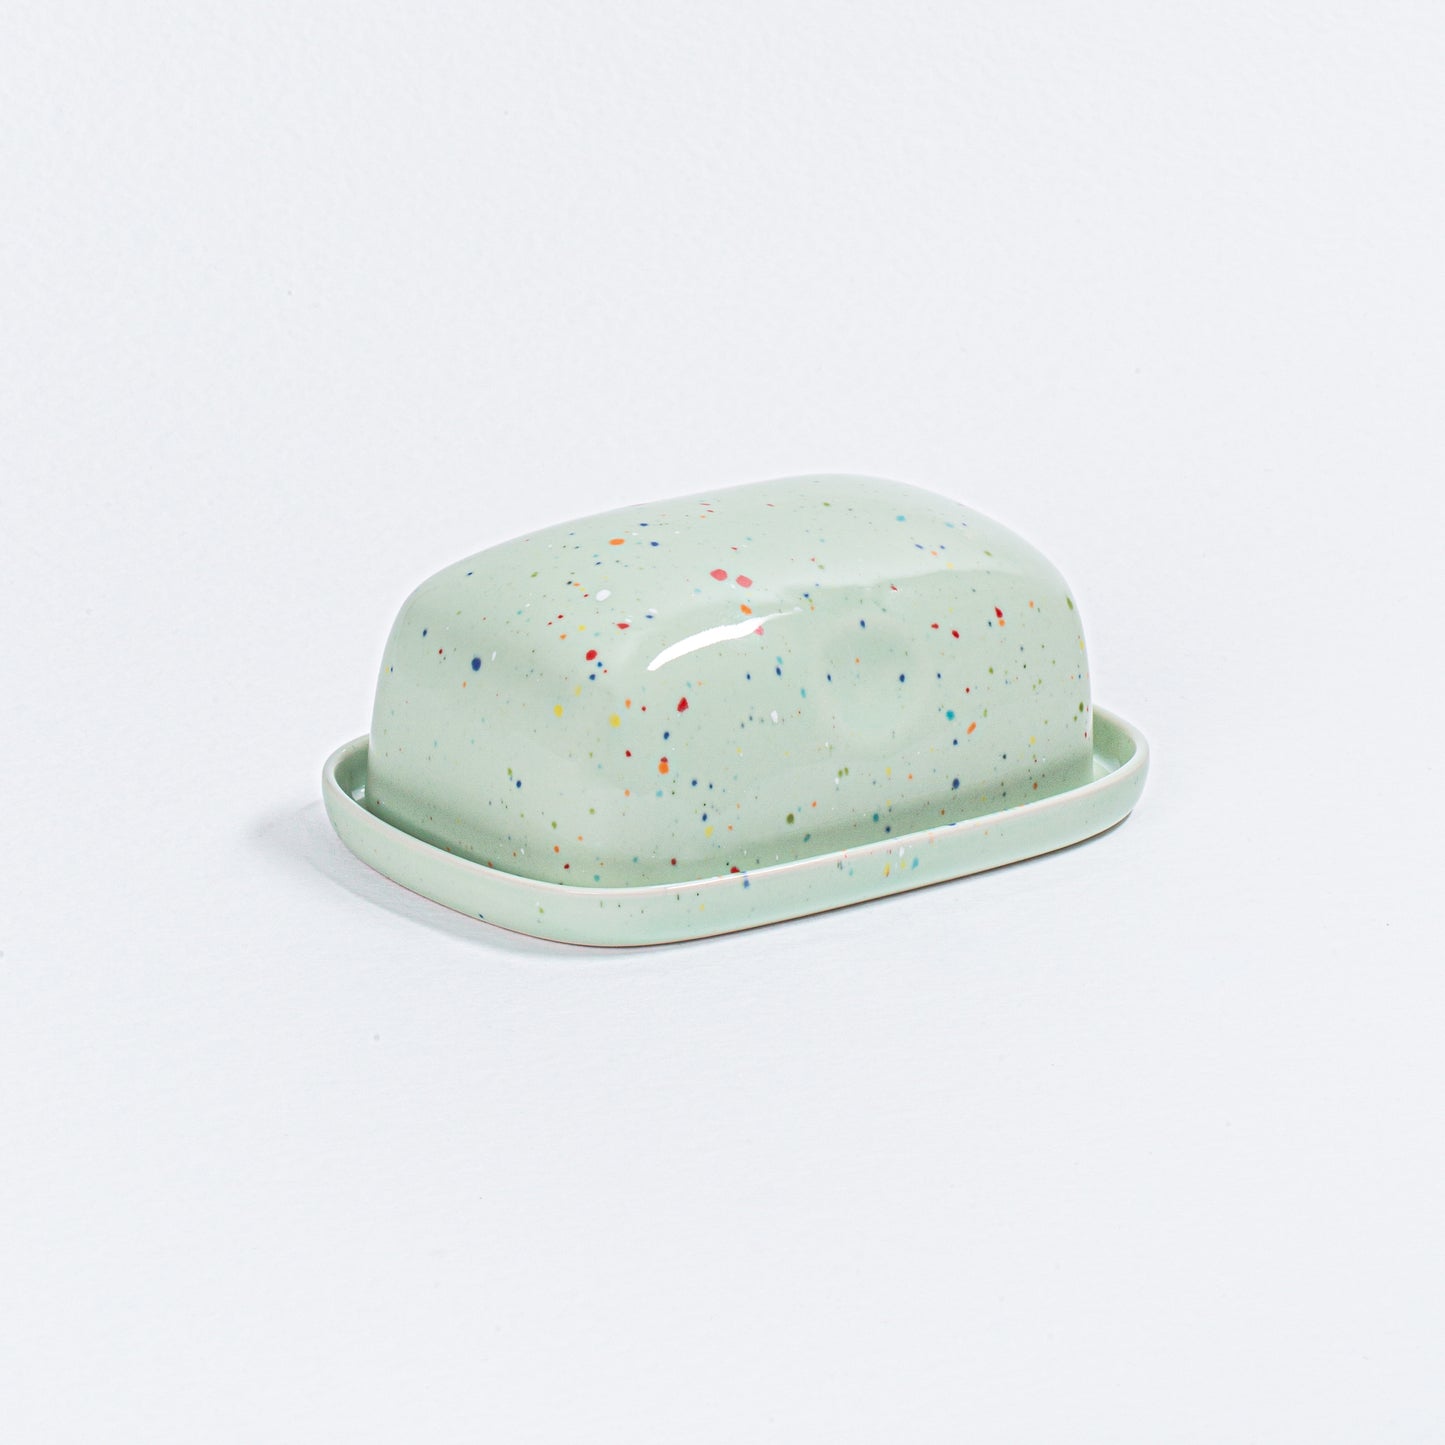 Green Butter Dish | Party Butter Dish | Egg Back Home